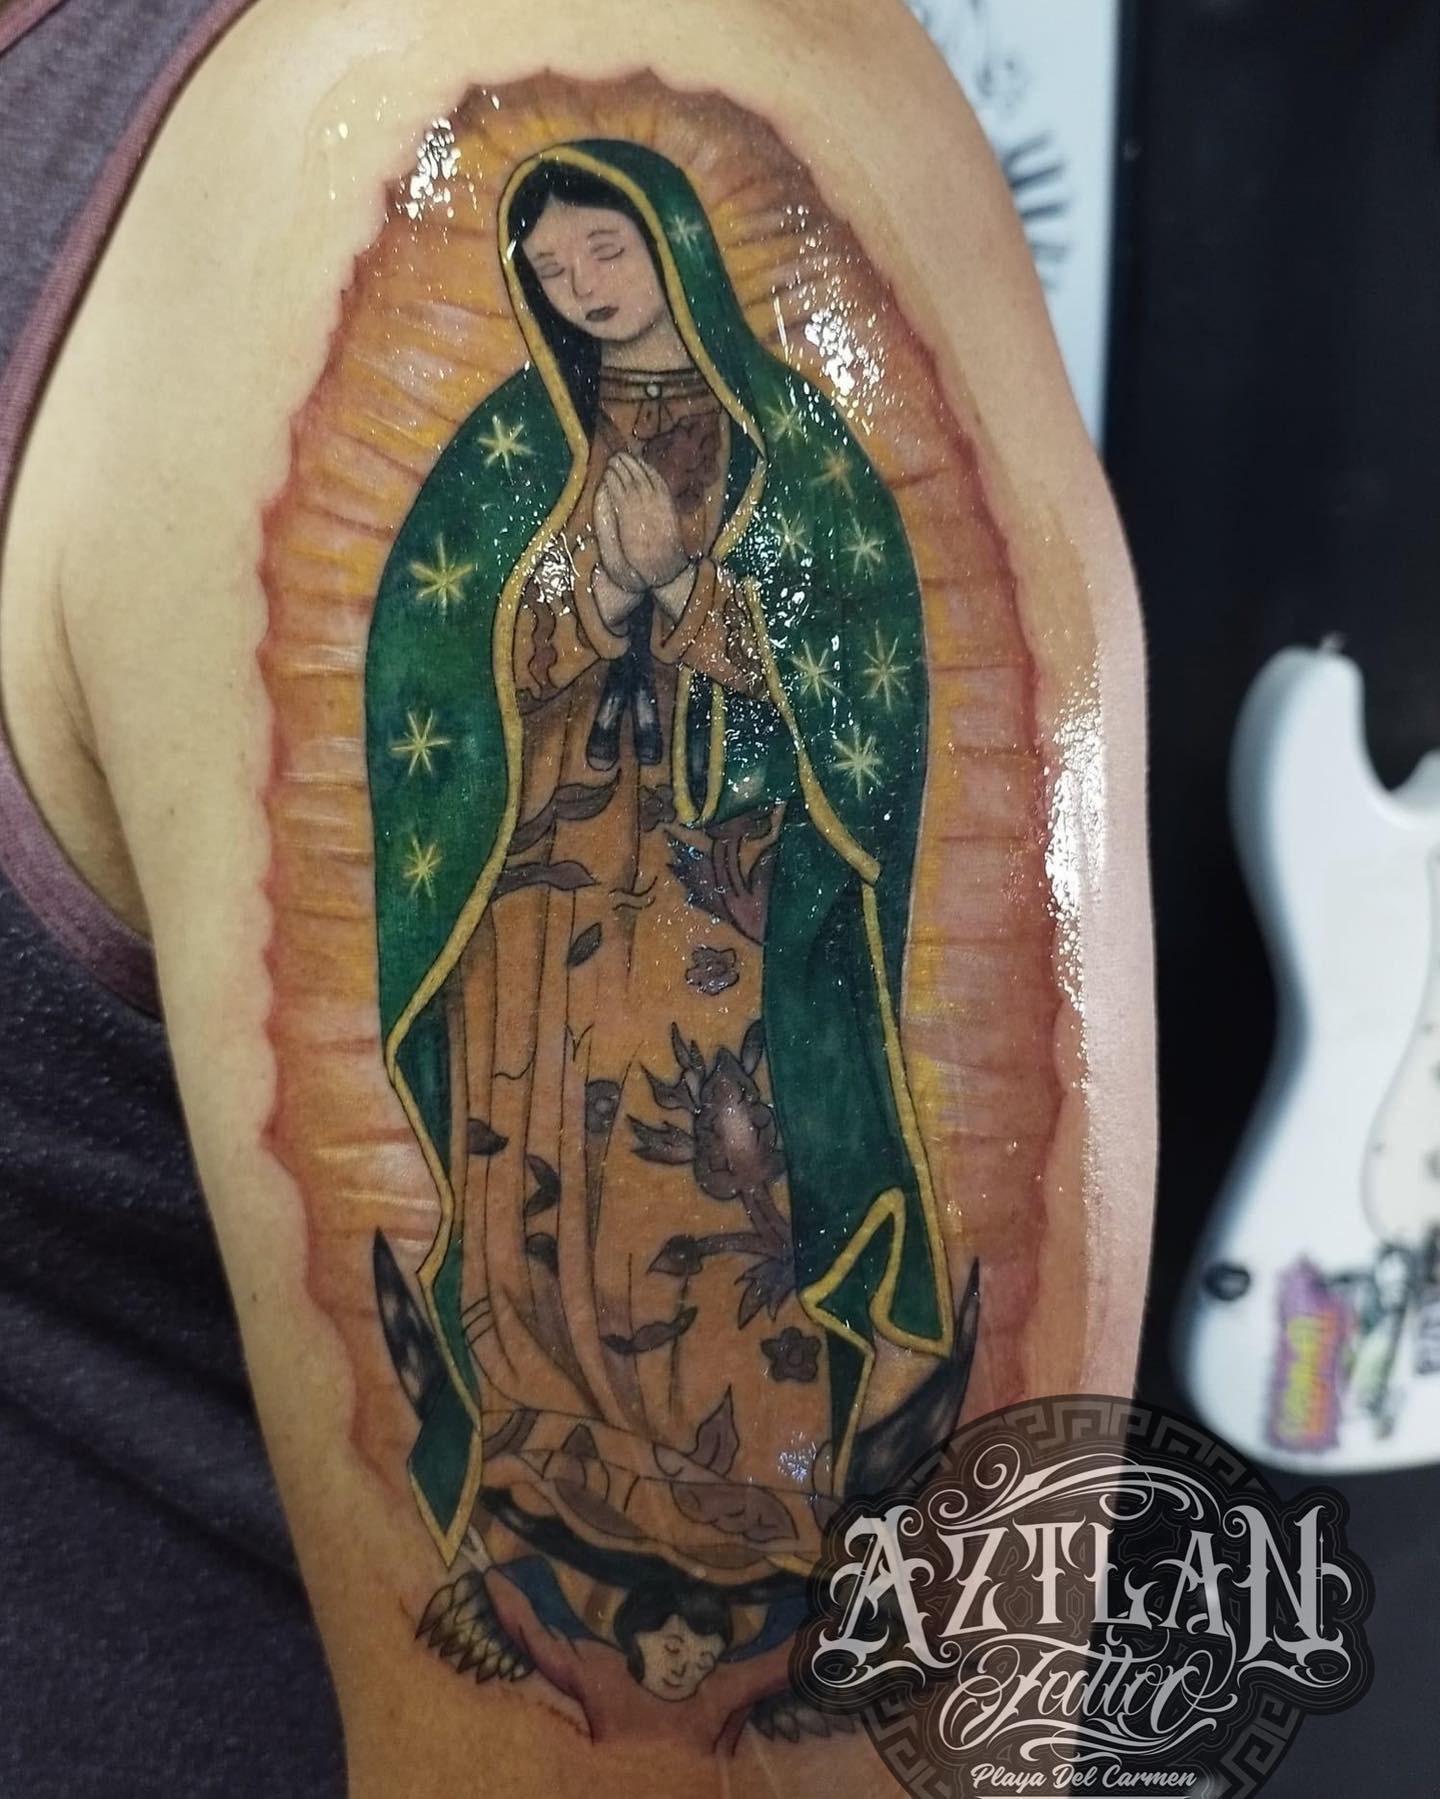 The Virgin of Guadalupe in honor of my very devoted Catholic mom and my  love for the poor and in need by Gilda Accosta of Lady Octopus Tattoos  Arlington VA  rtattoos